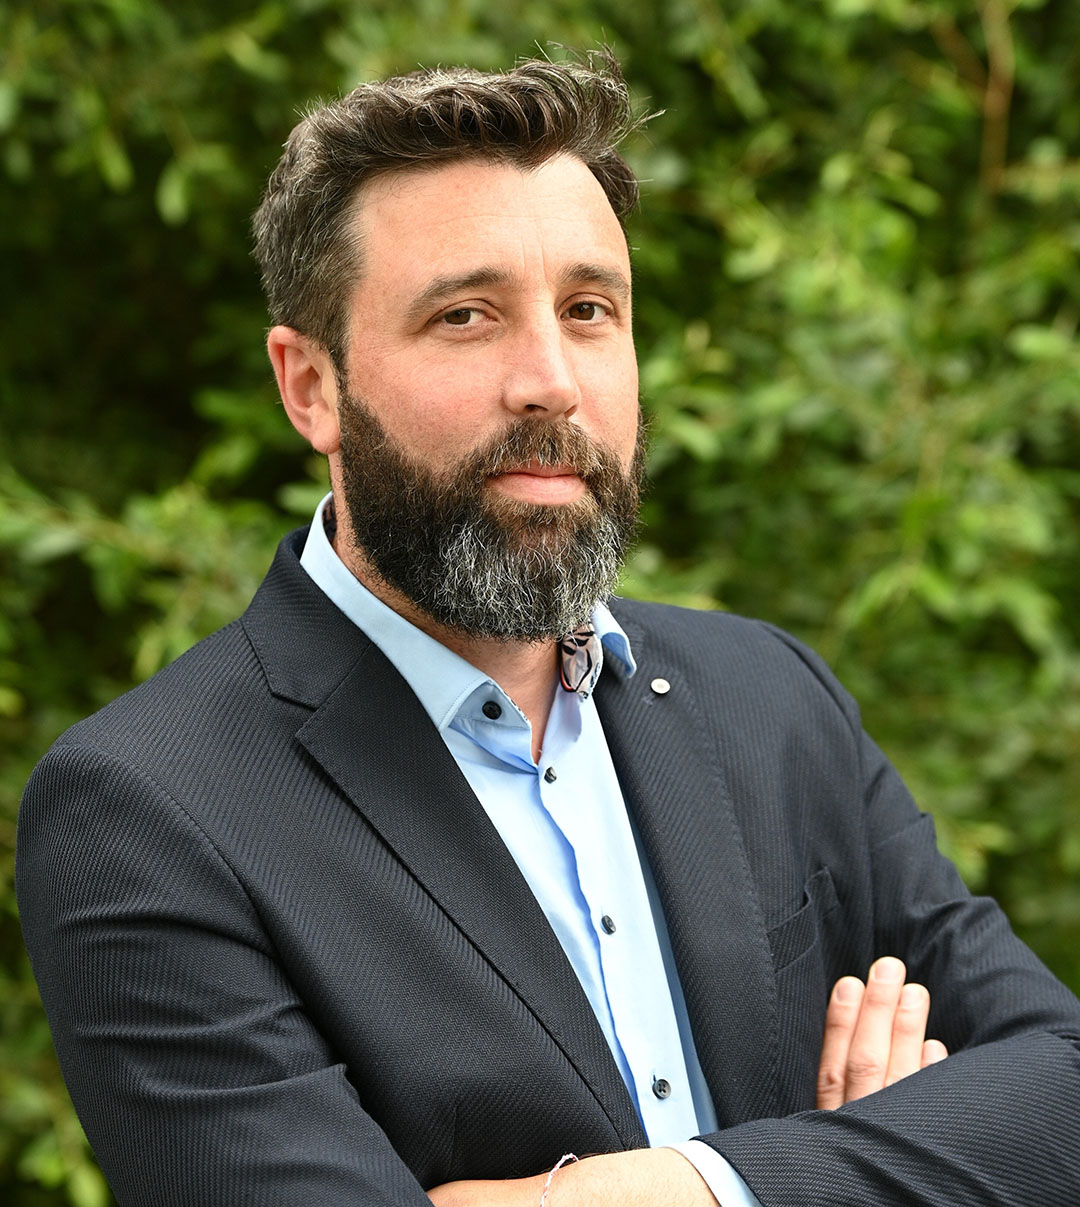 Michel Marcon became the director of R&D at IFIP in October 2019. His current research projects include the early detection of pathology and precision feeding.